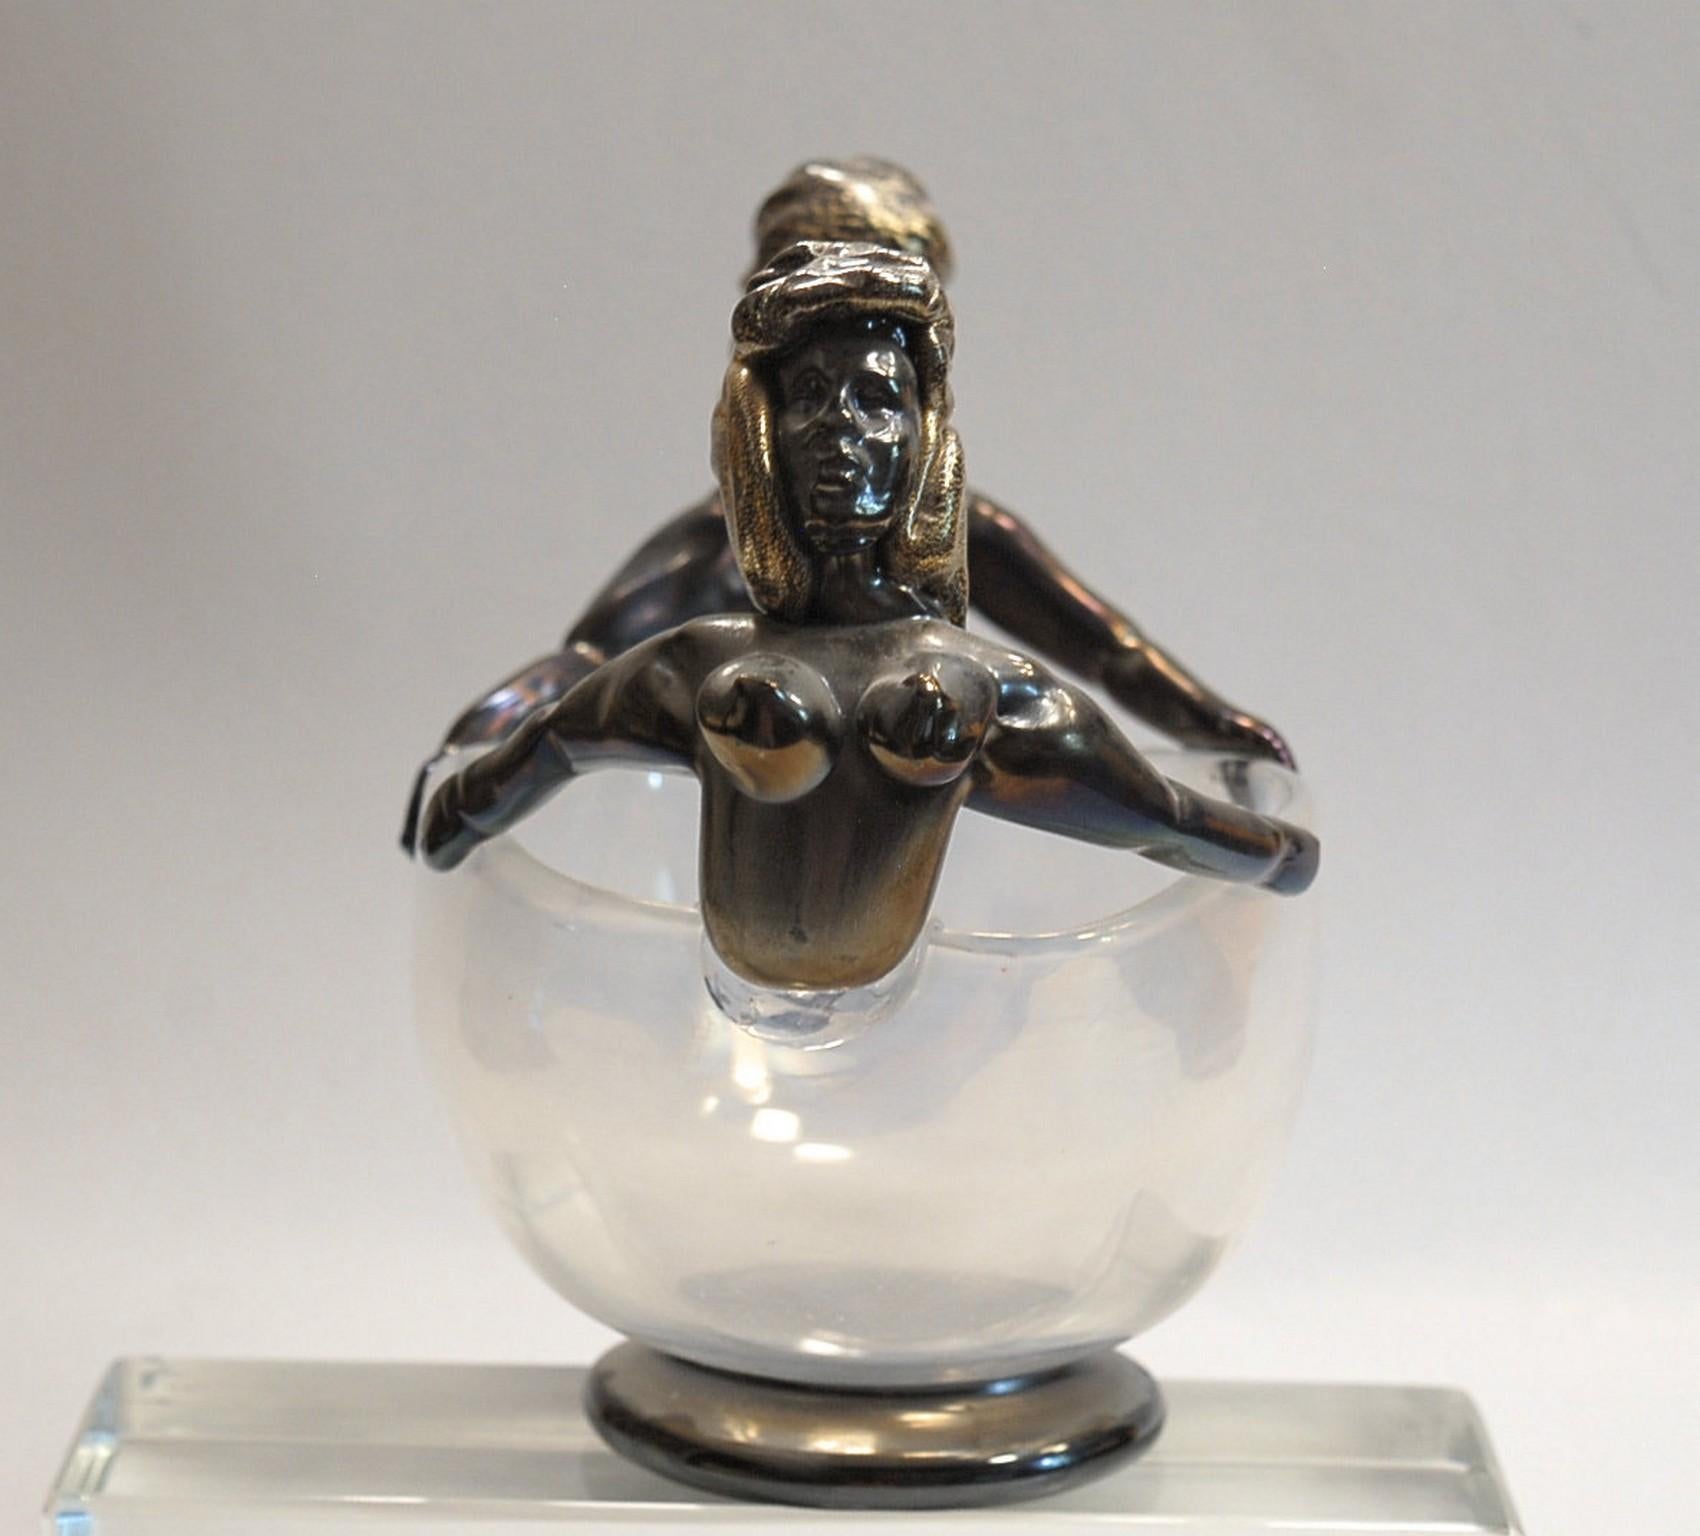 Art Glass Iridescent Bowl with figurine in Figurehead Position, Ercole Barovier, 1930 For Sale